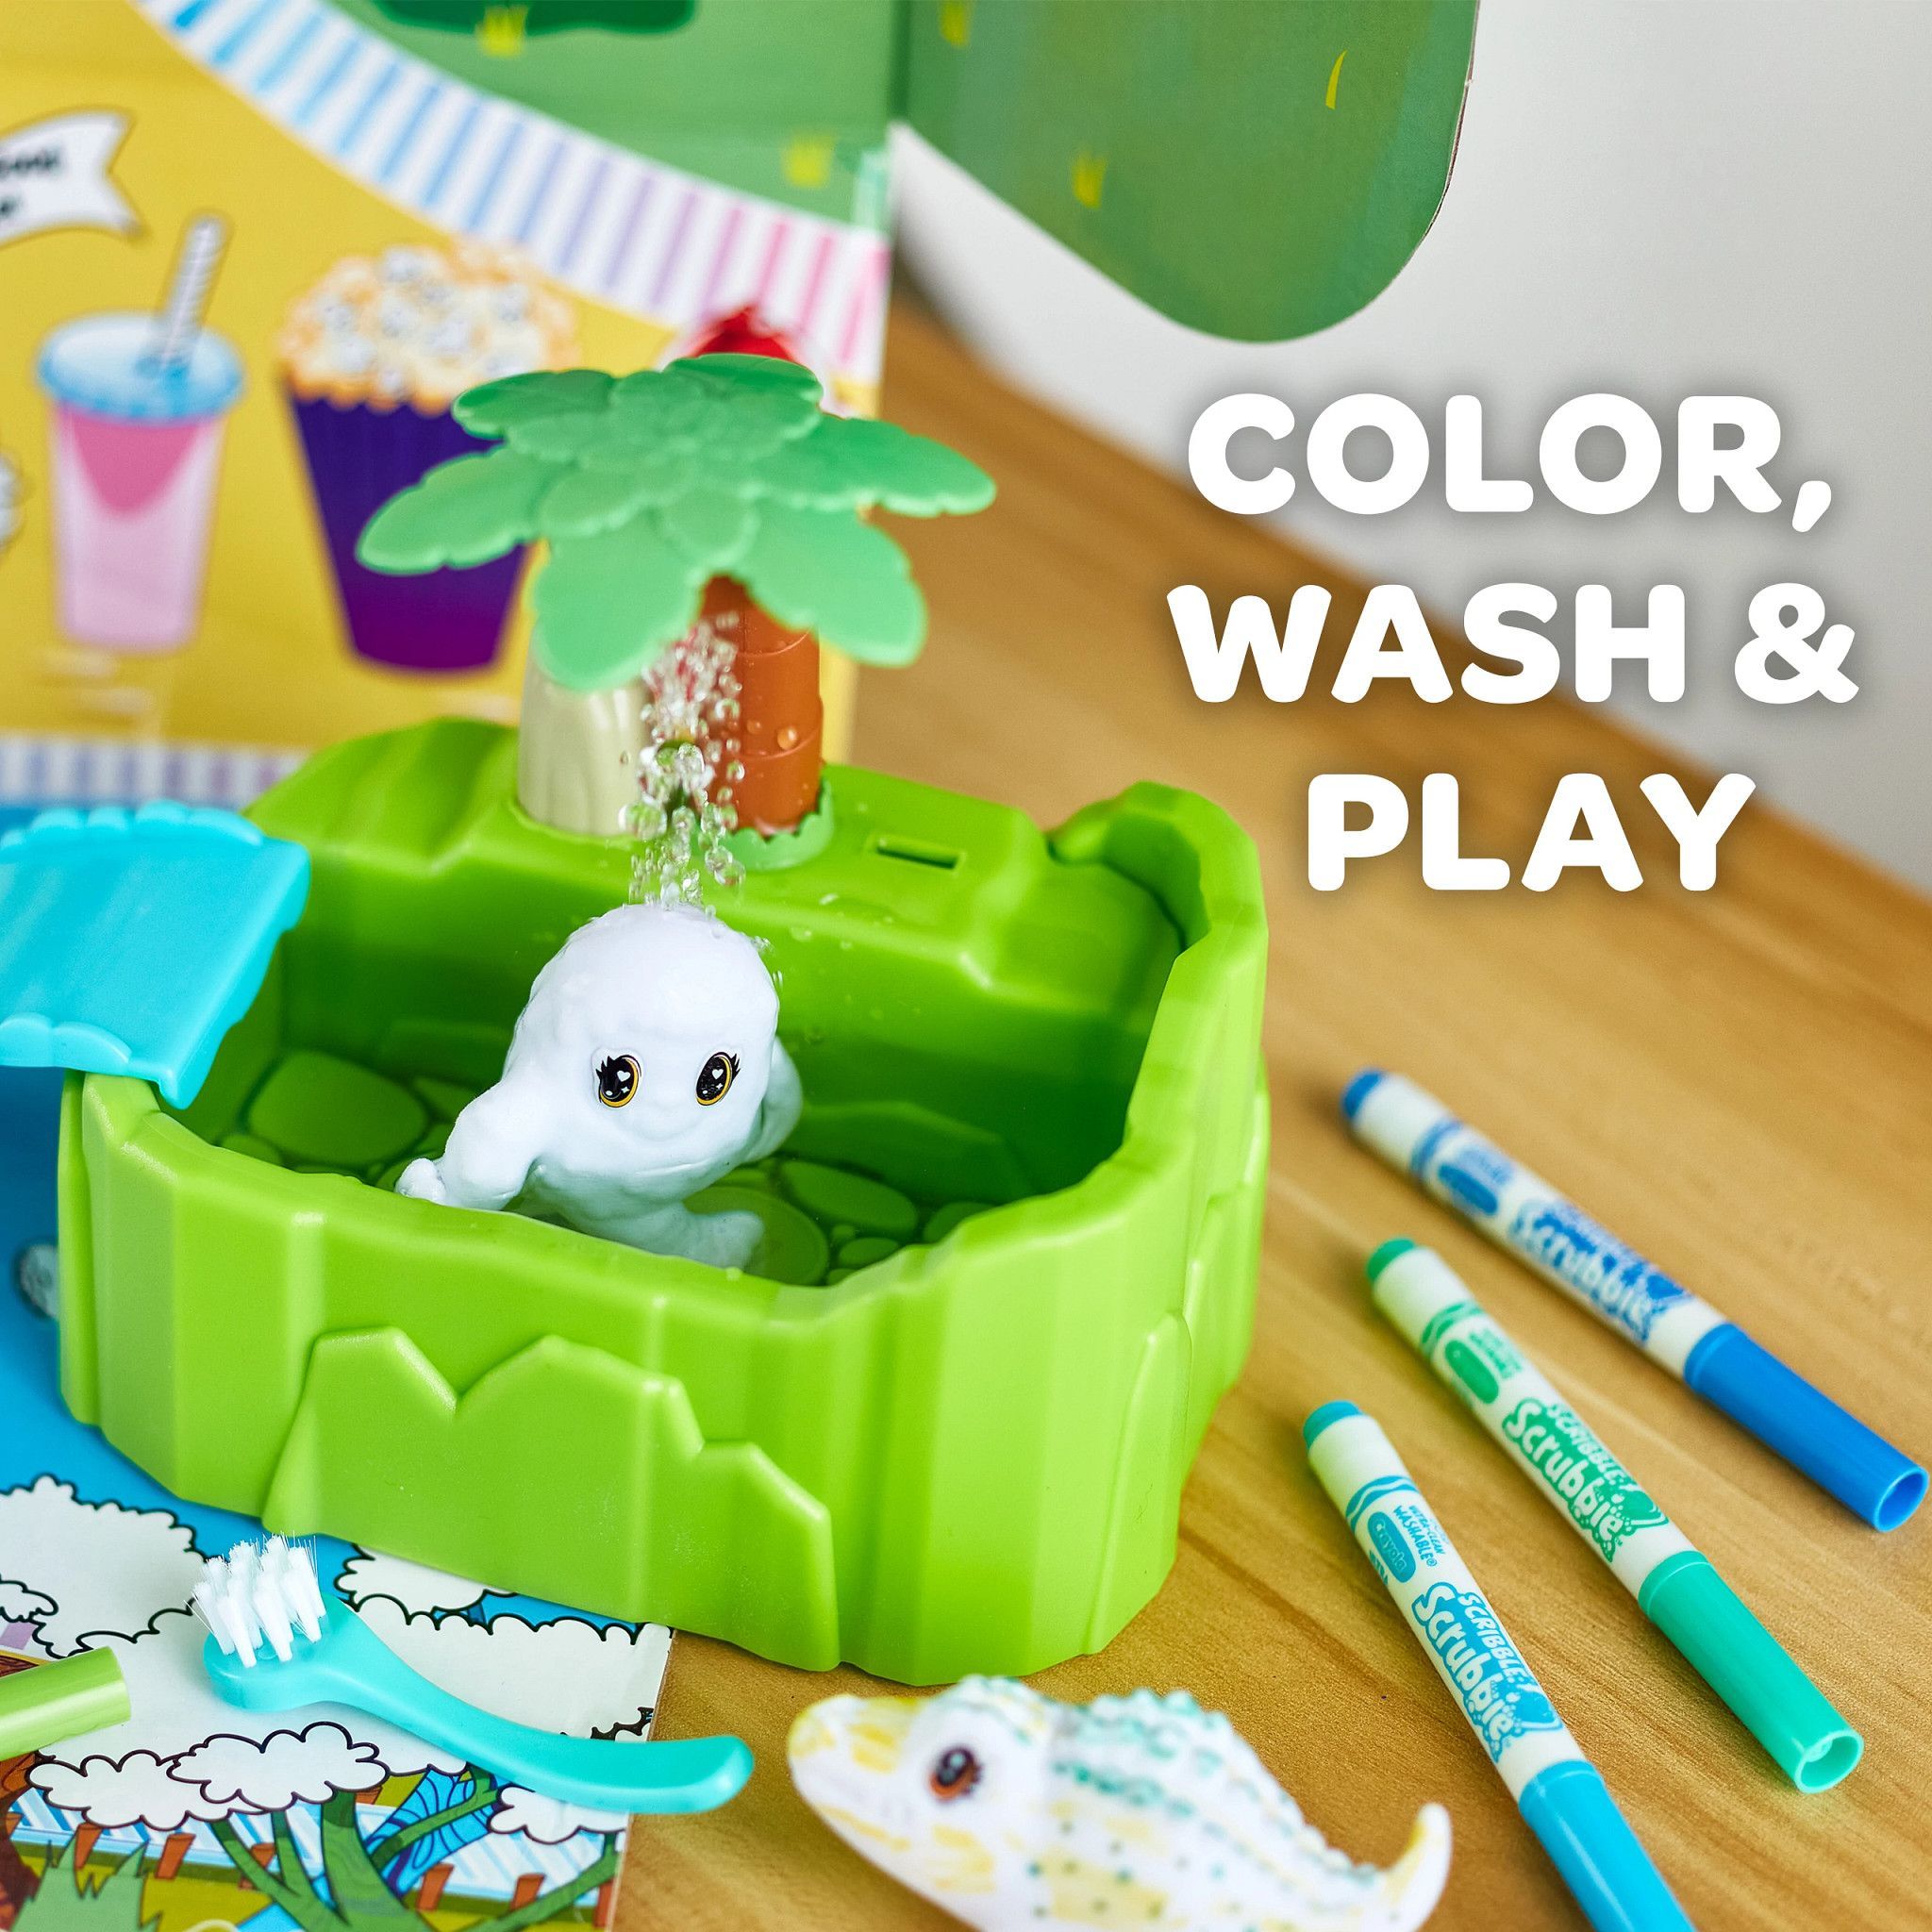 Crayola Scribble Scrubbie Peculiar Zoo Mess Free Playset, Creative Toys, Gift for Beginner Child - image 5 of 9